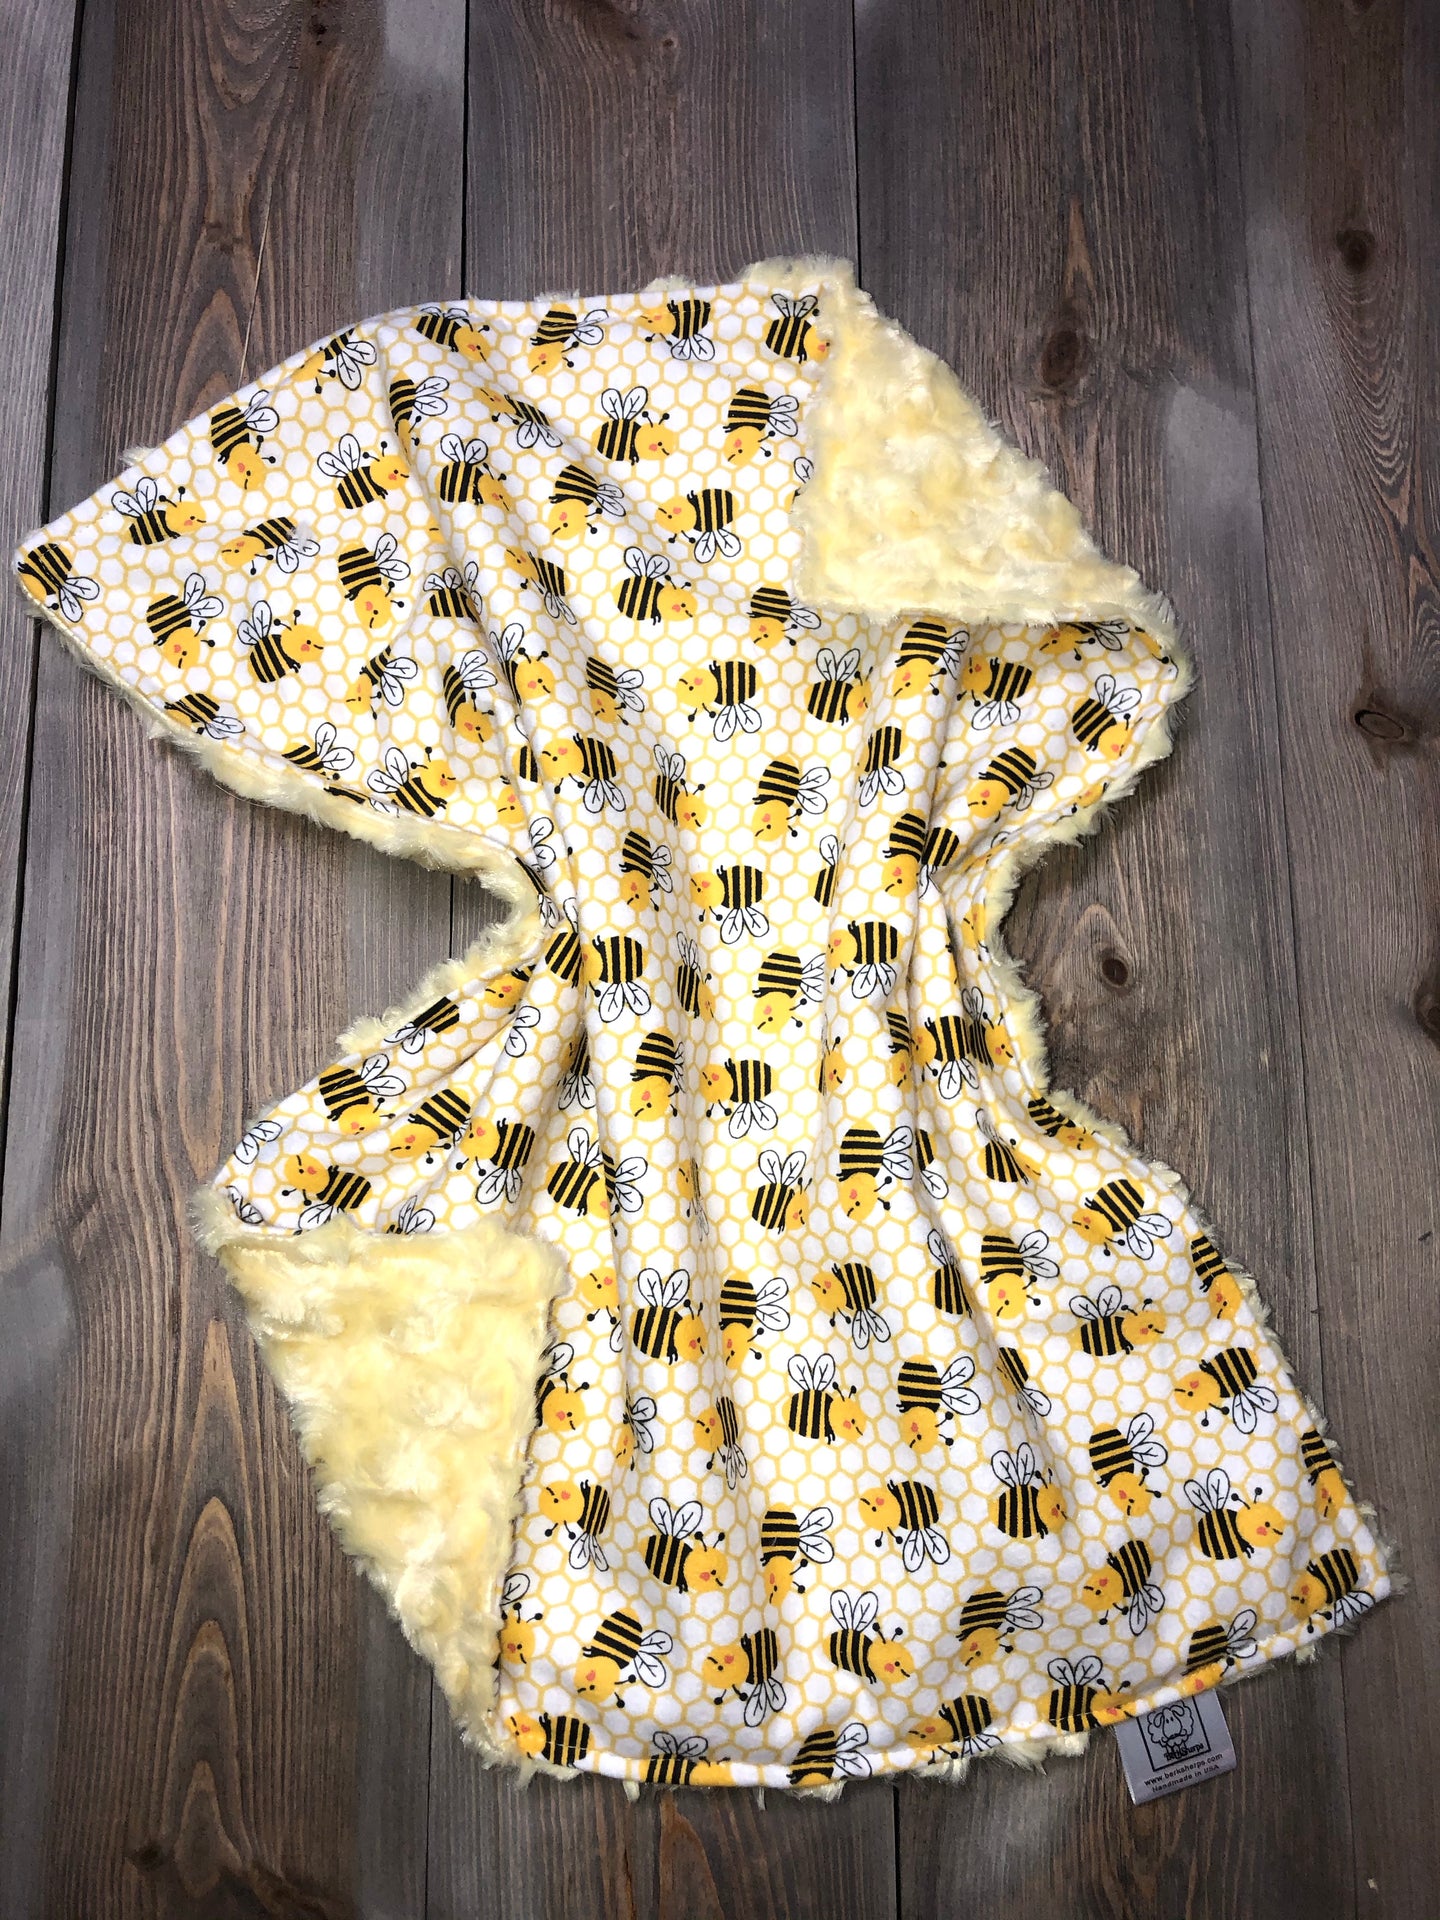 Bumble Bees Flannel/Yellow Minky Swirl